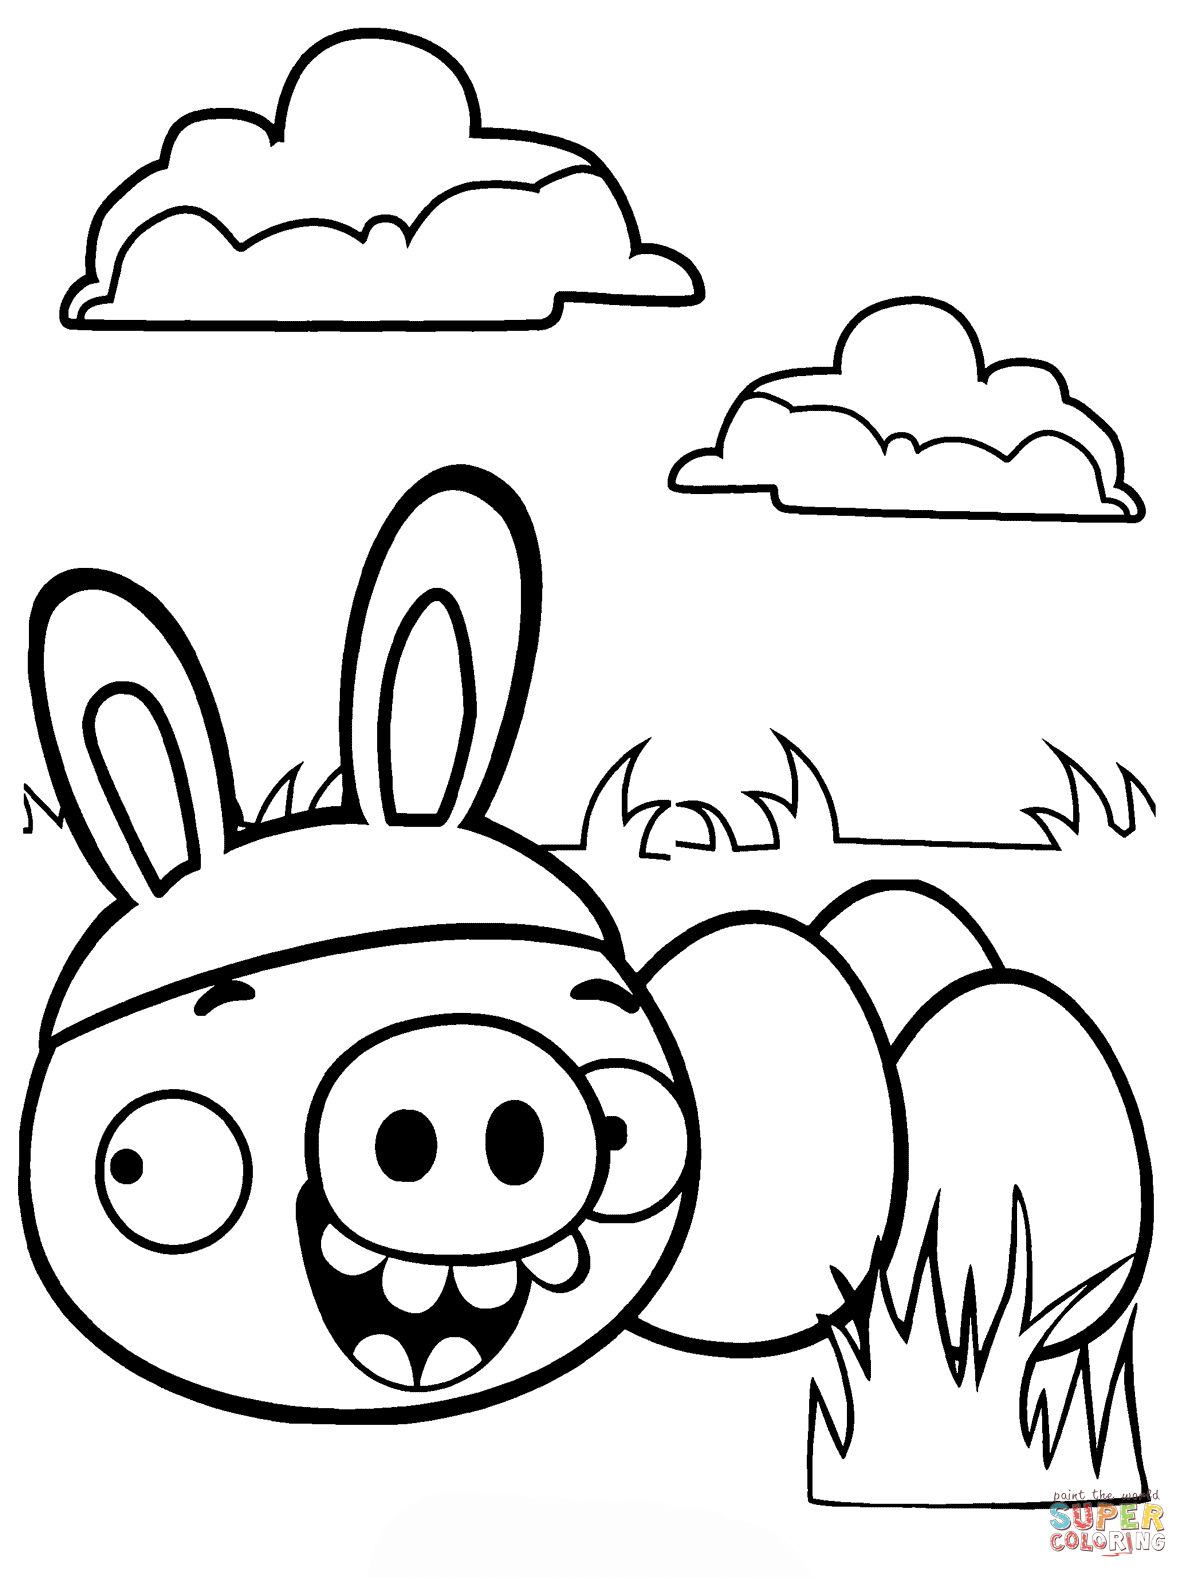 Minion Pig Stealing Easter Eggs Coloring Page | Free Printable - Free Printable Easter Drawings